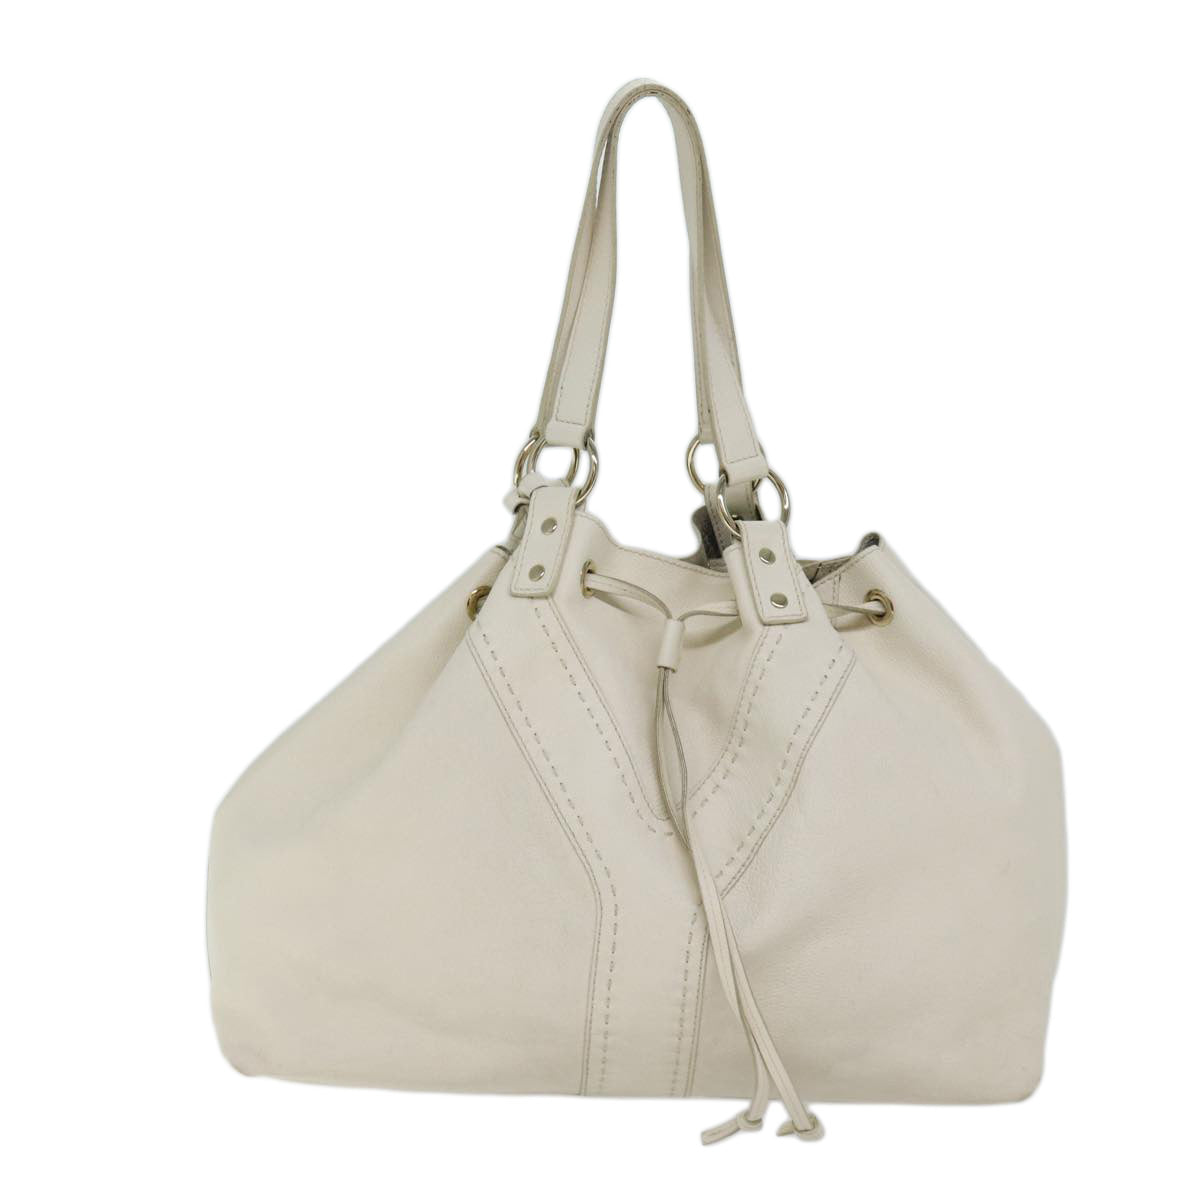 SAINT LAURENT Tote Bag Leather White Auth bs13659